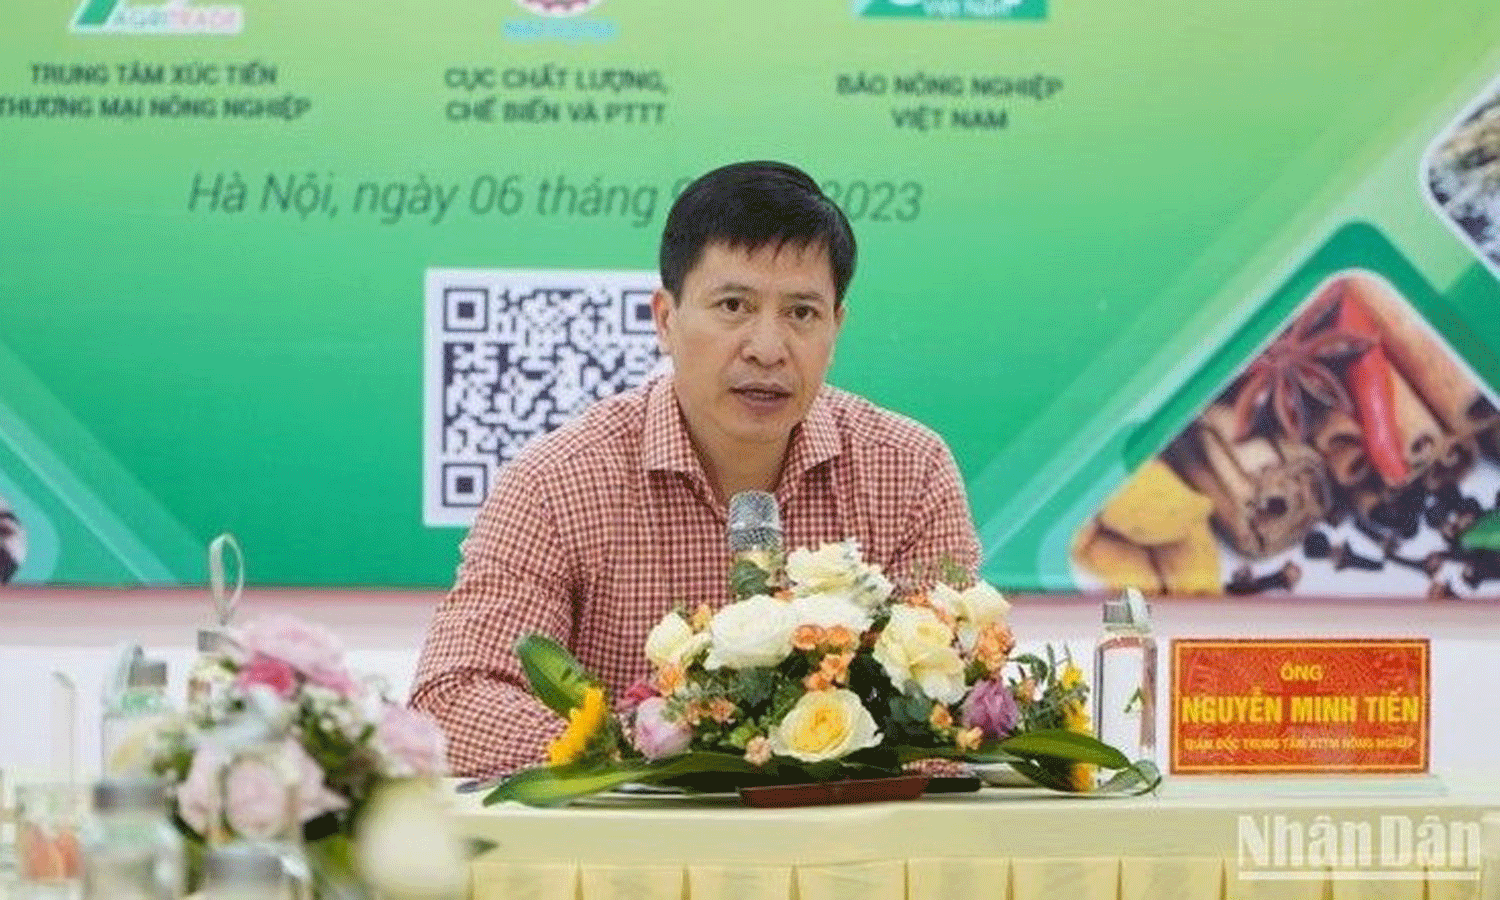 Director of the Vietnam Trade Promotion Centre for Agriculture Nguyen Minh Tien speaking at the press conference (Photo: NDO).